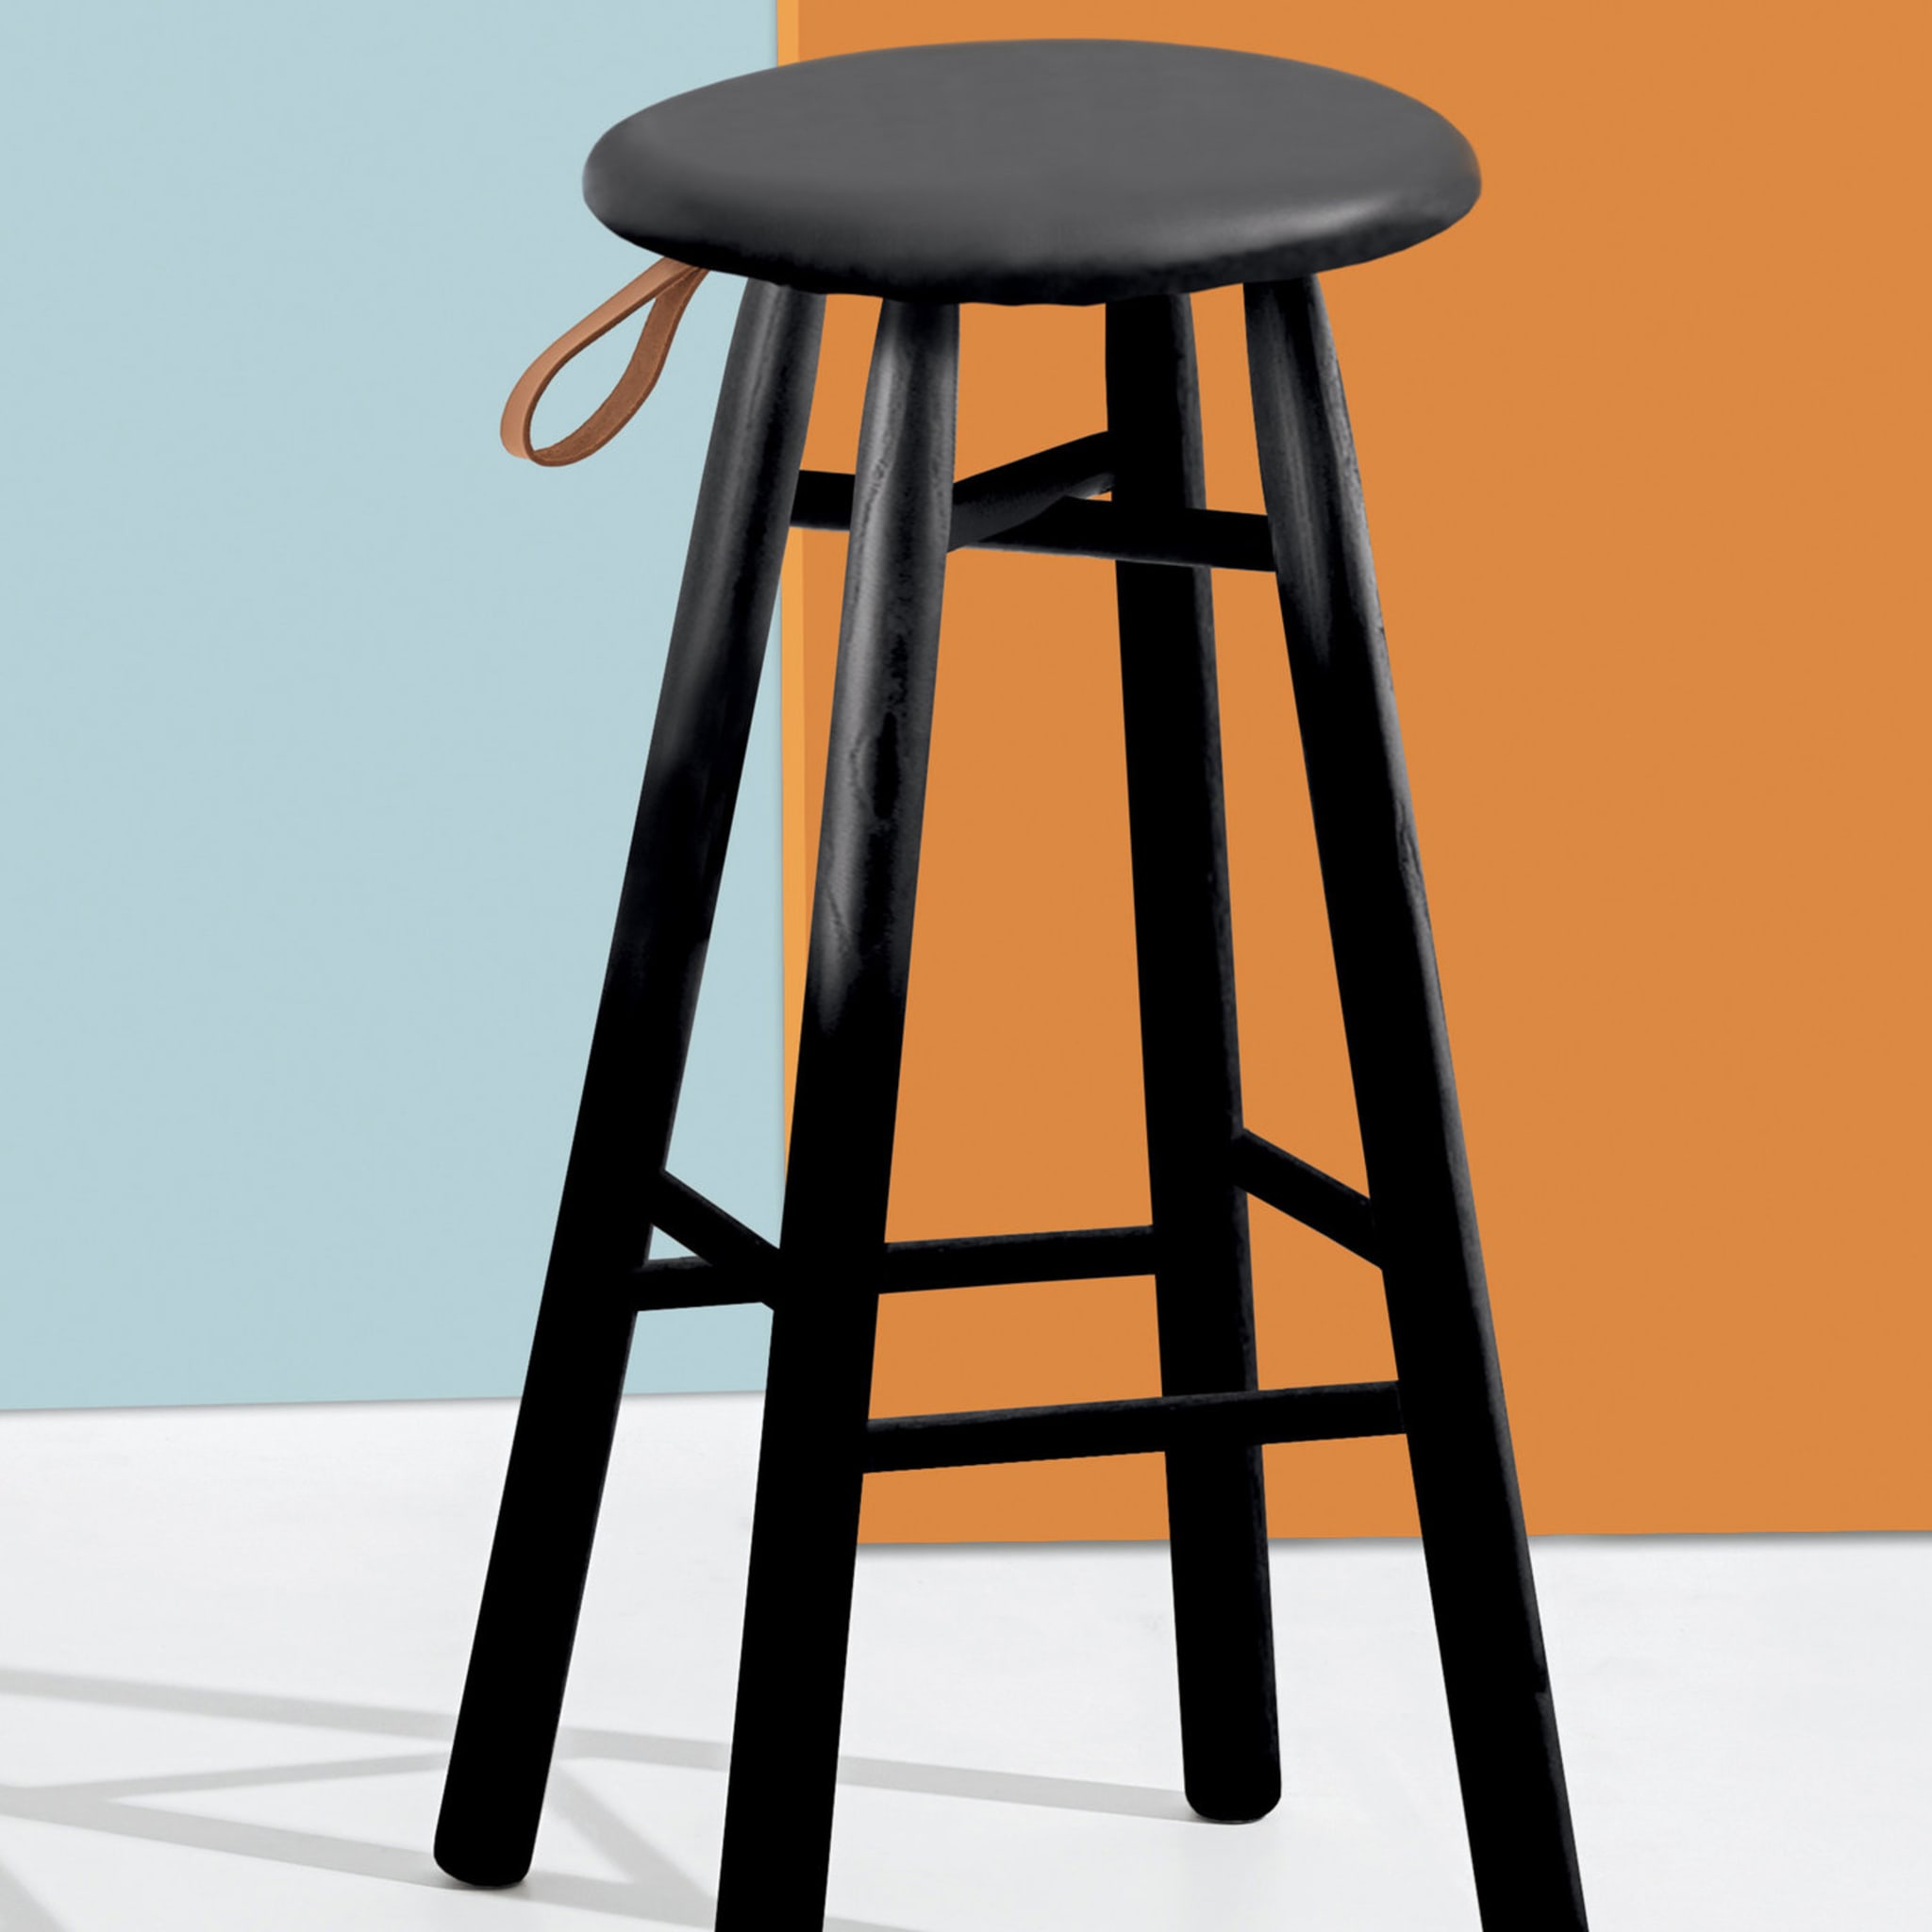 Tag Black Leather High Stool - Alternative view 1